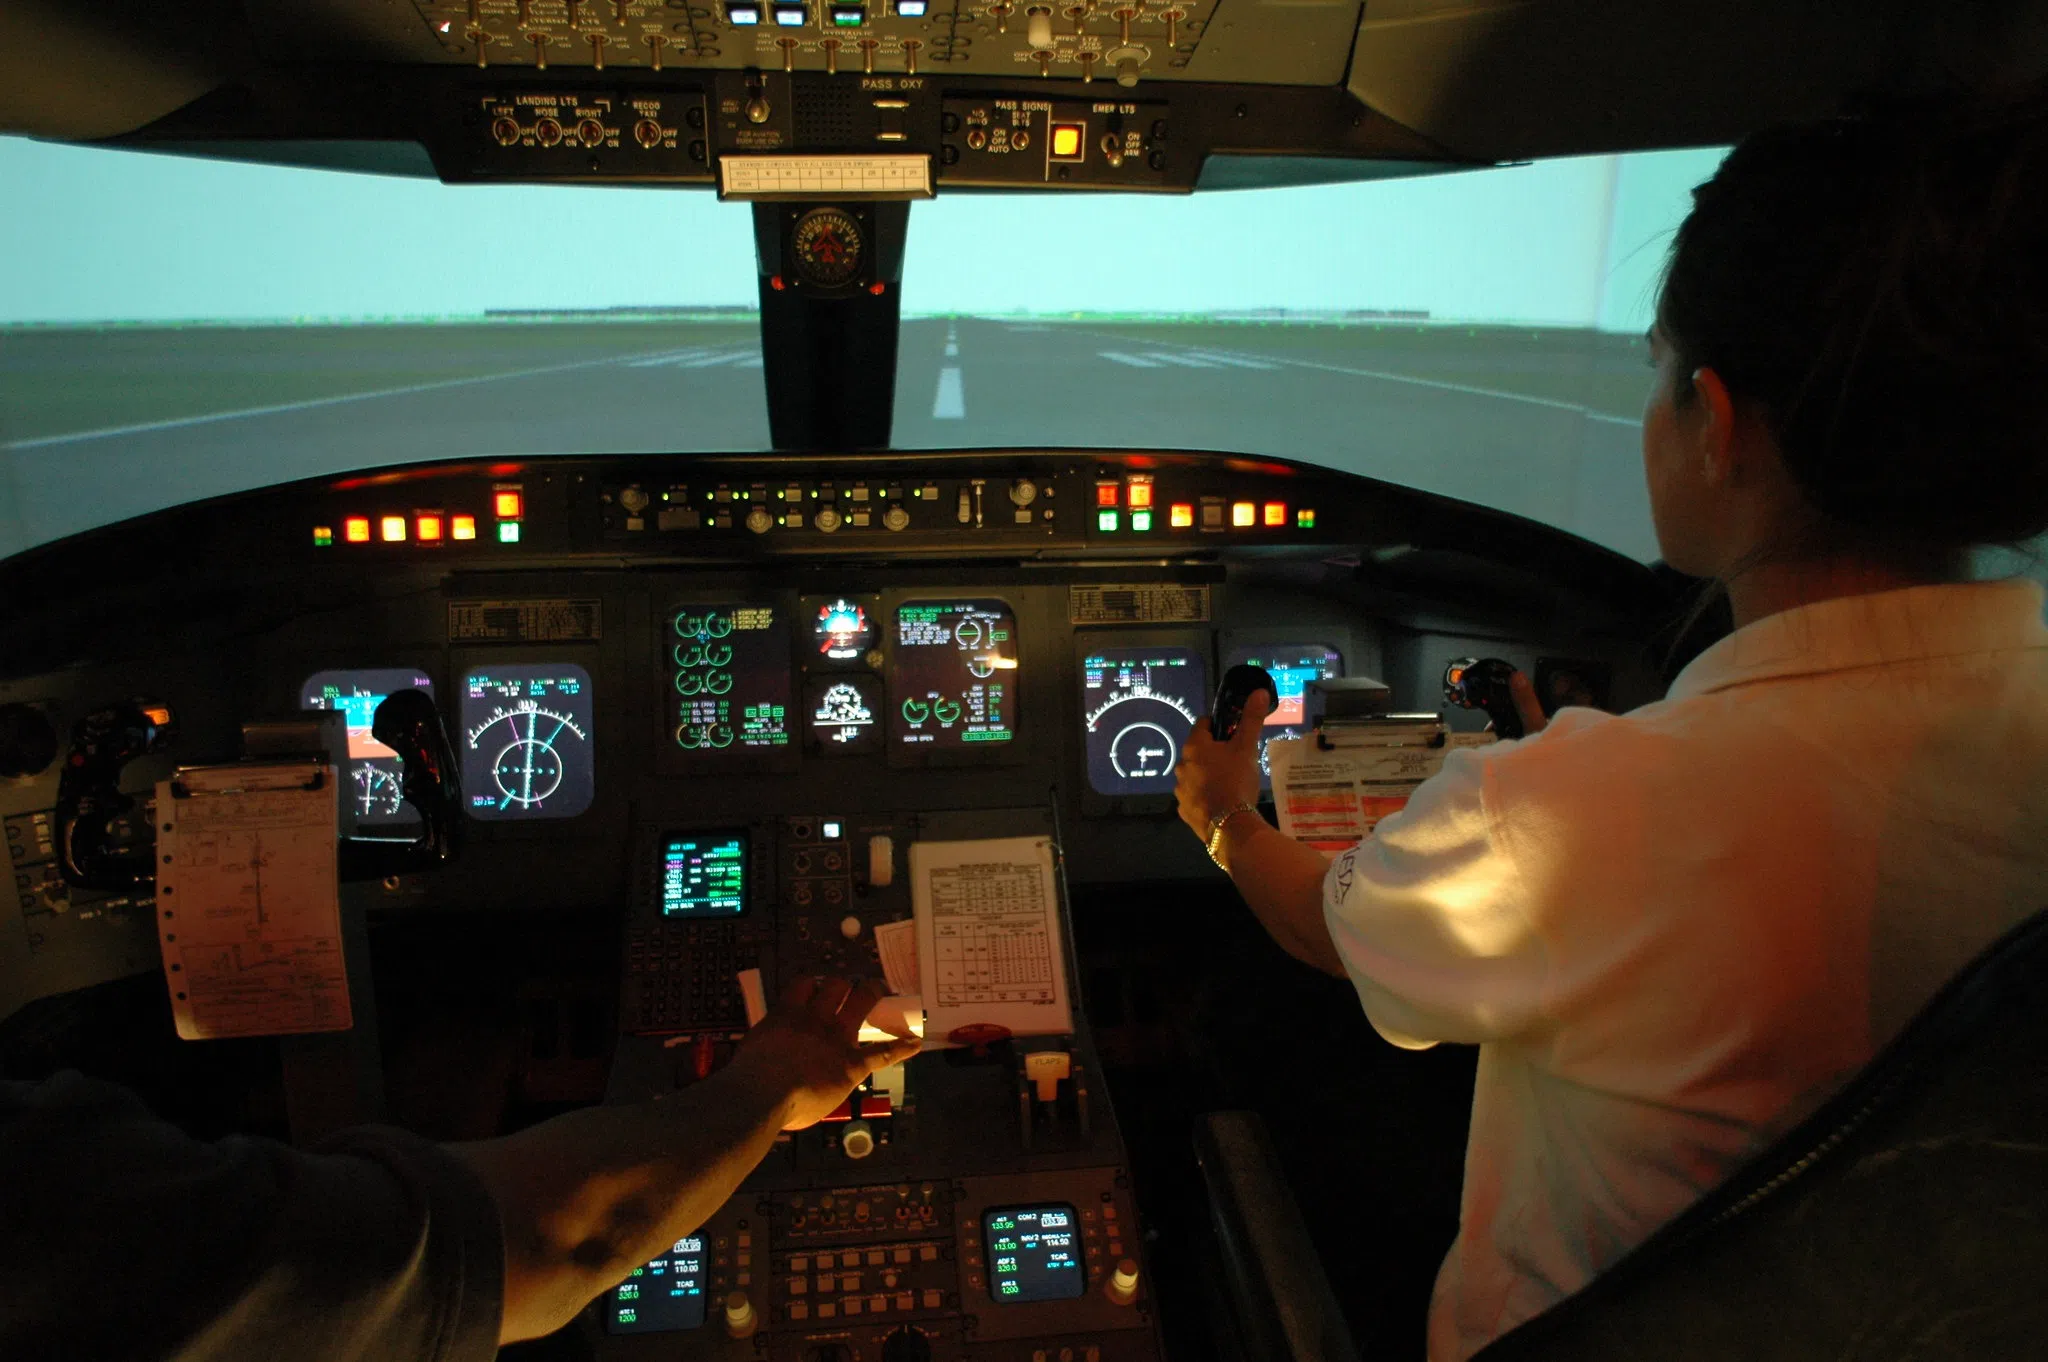 Man and Woman sit at controls of an airplane cockpit simulator.